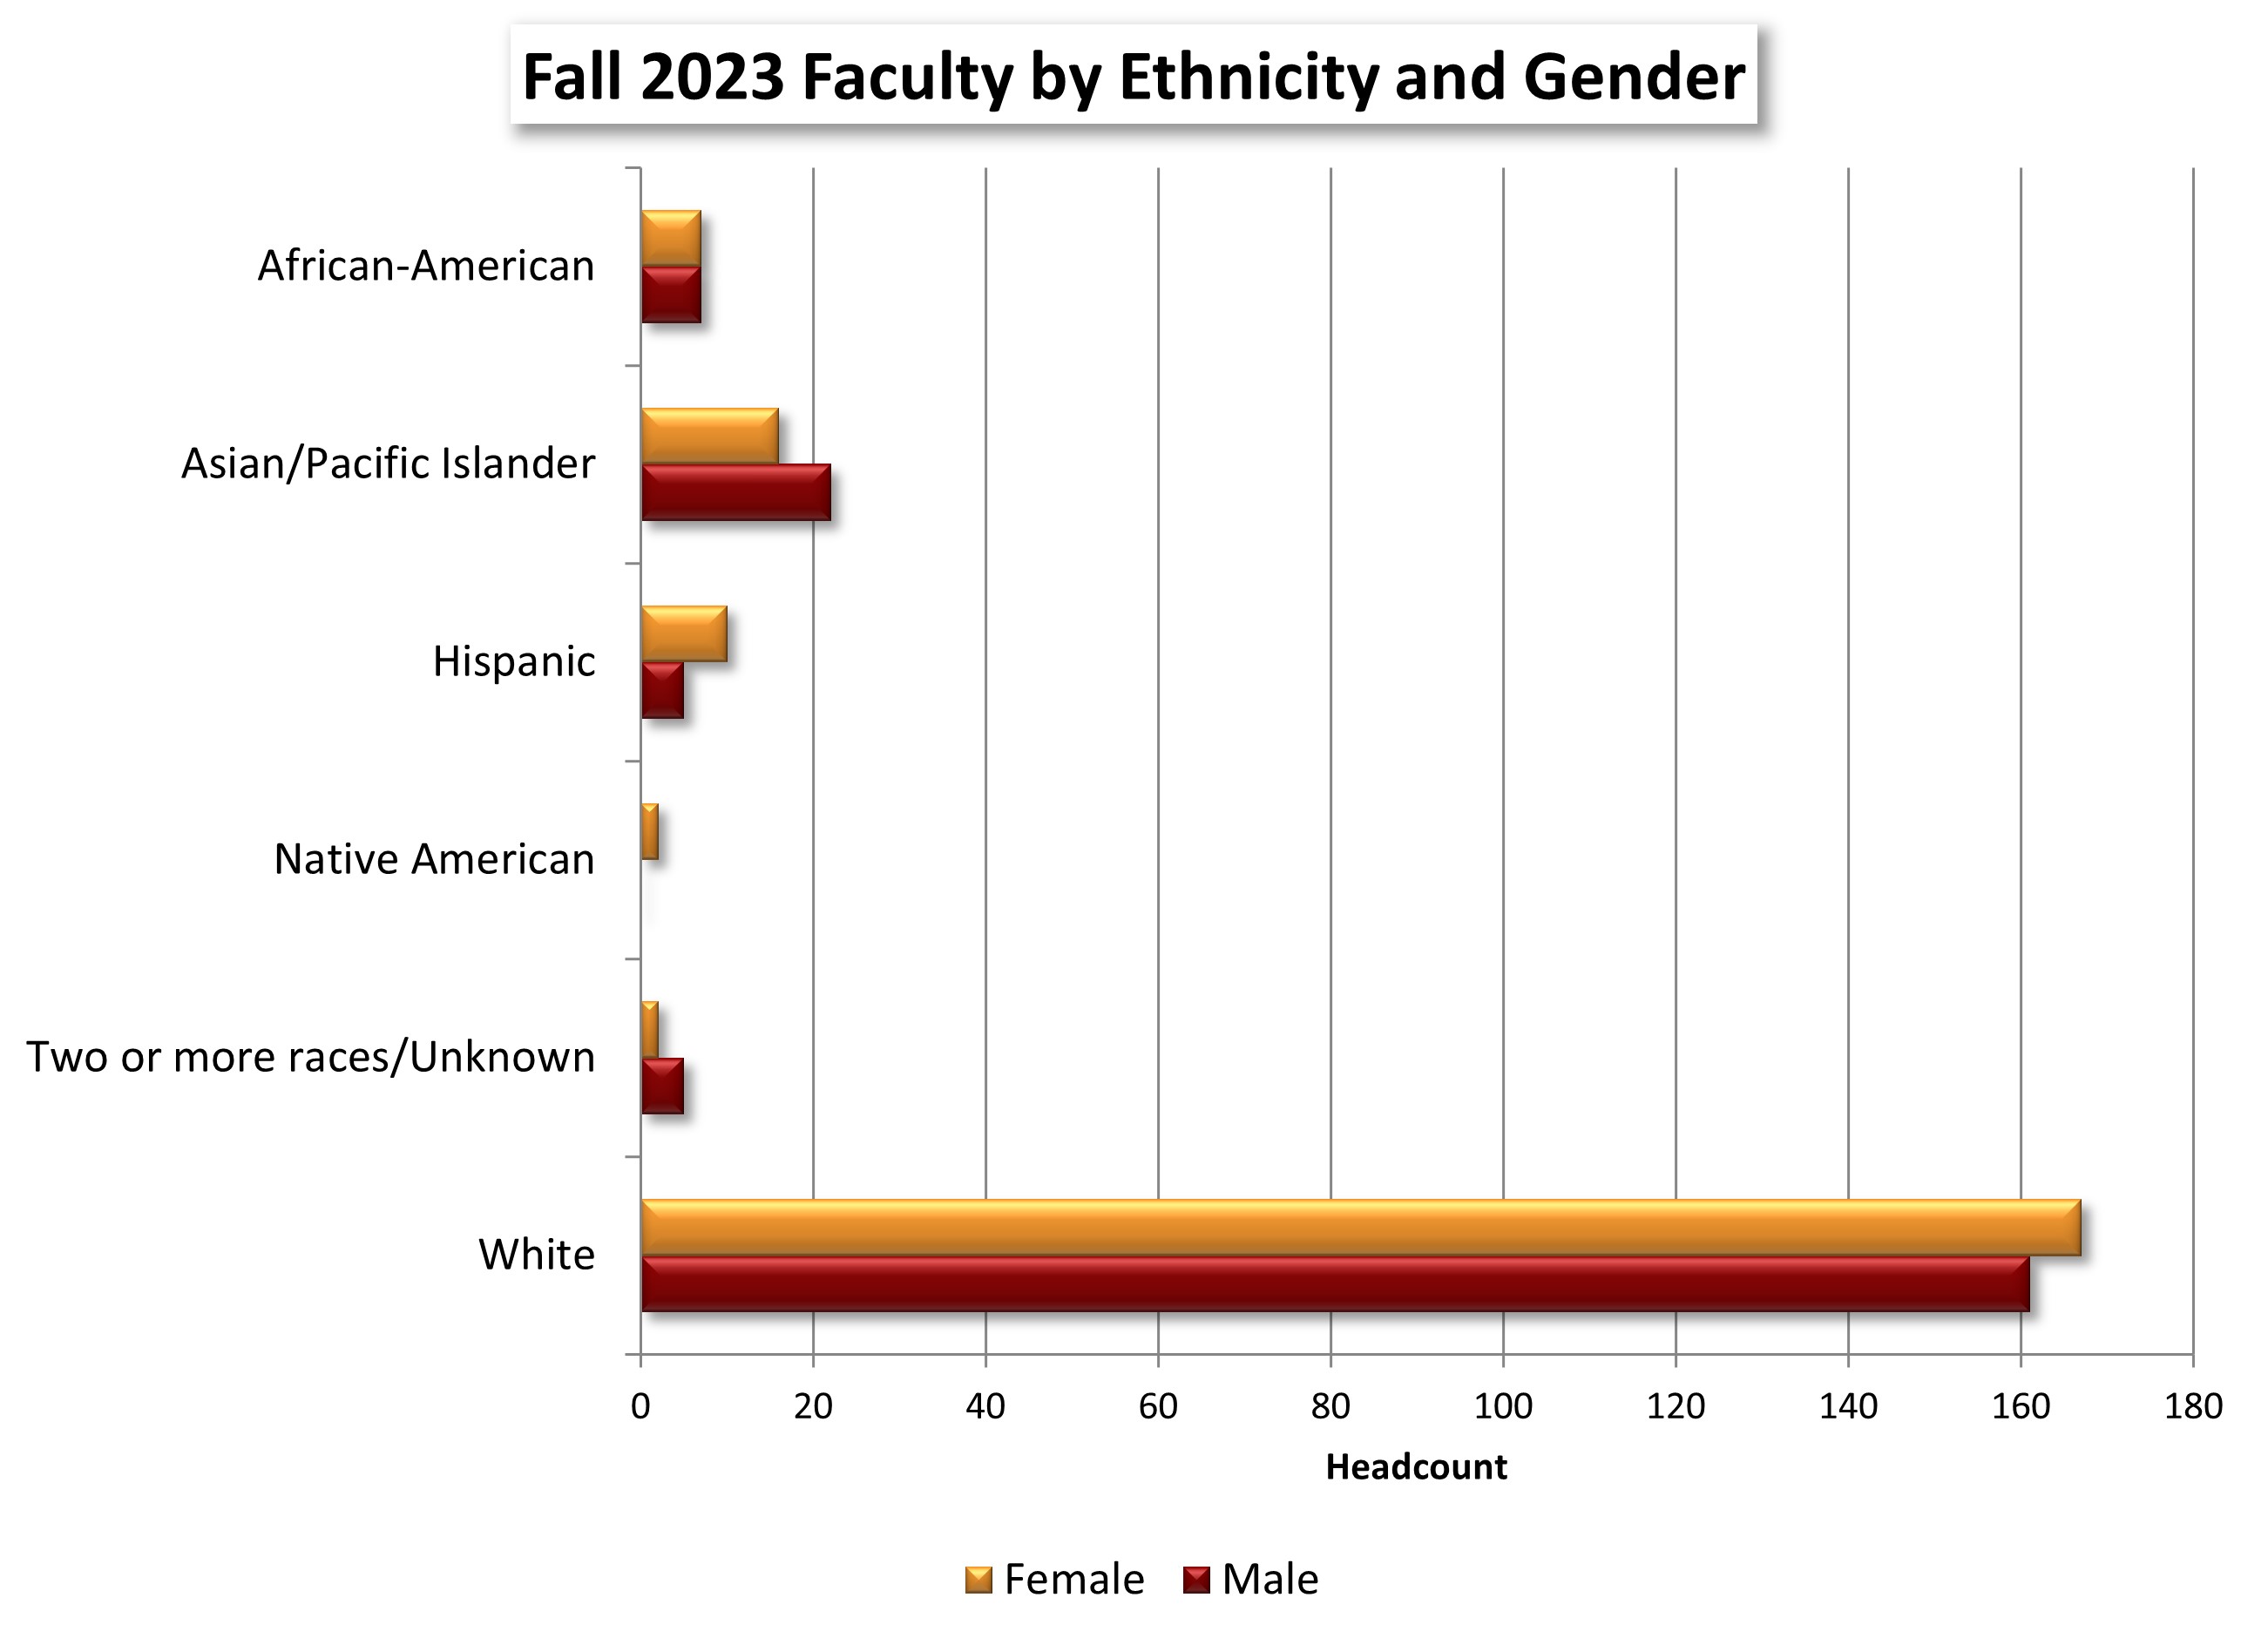 Fall 2018 Faculty by Ethnicity and Gender chart